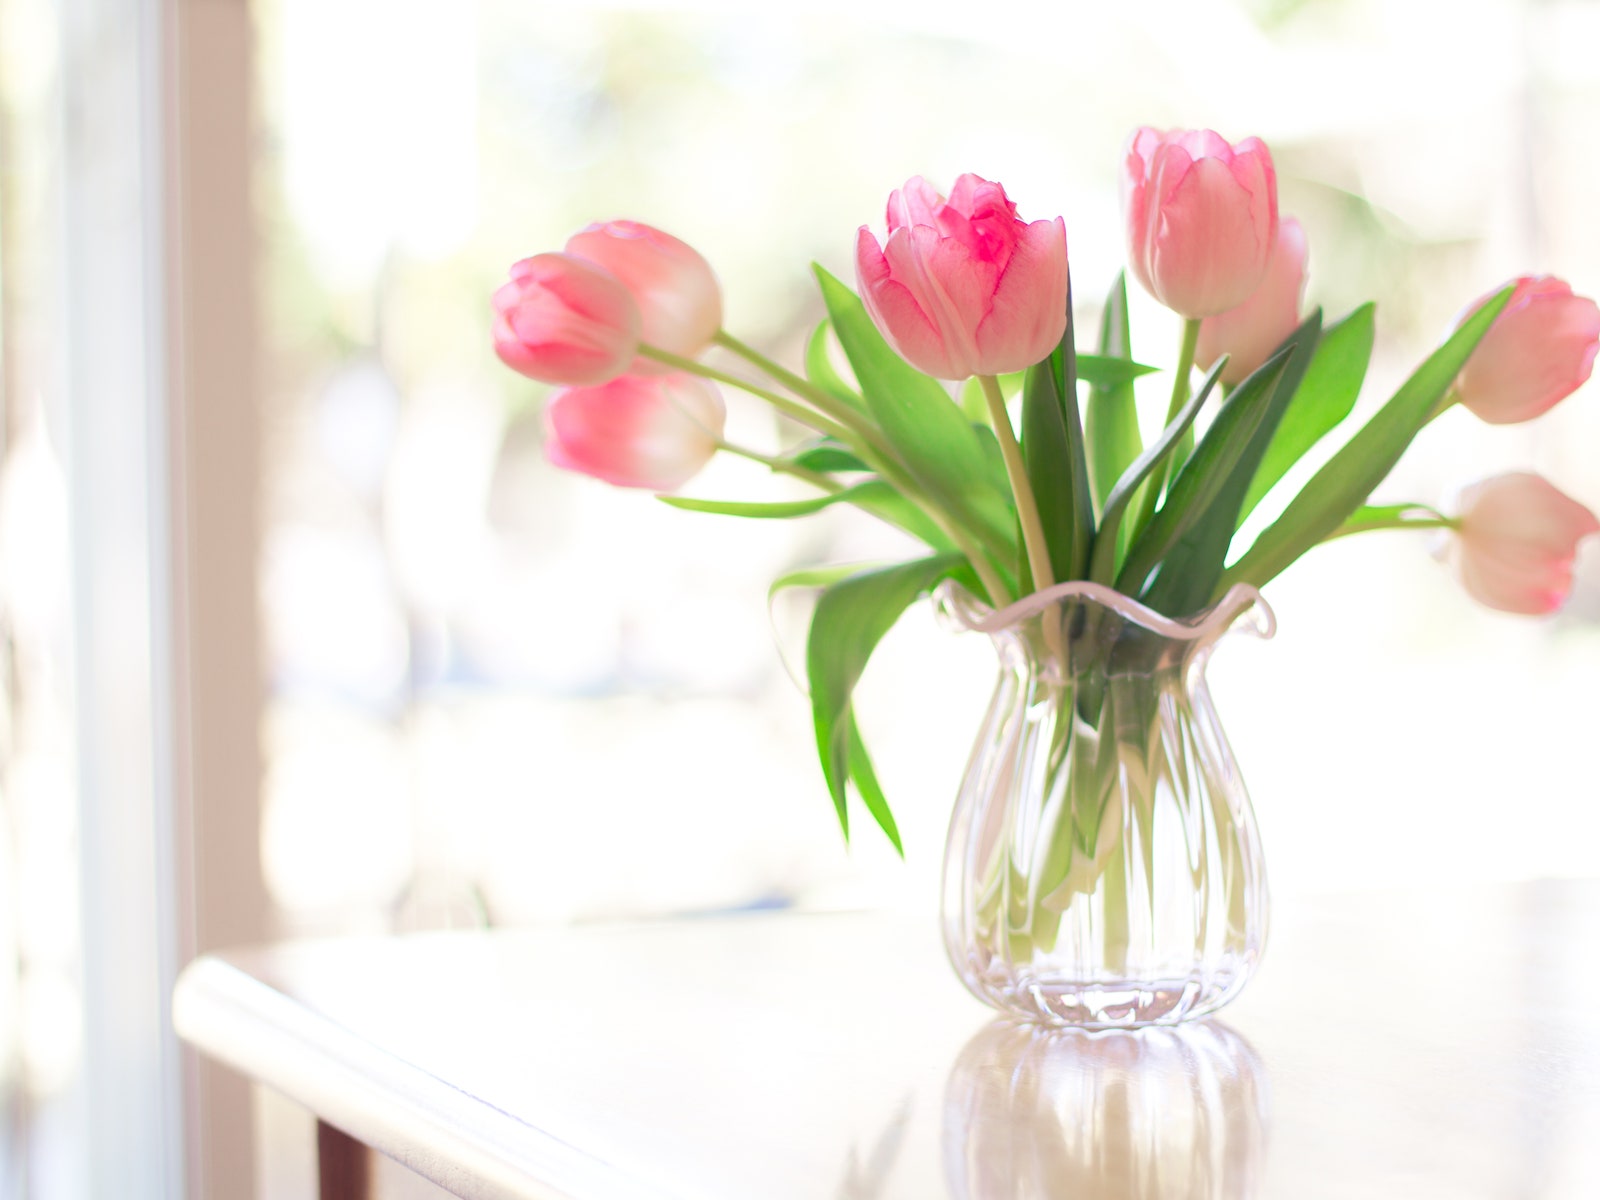 Ruffled pink glass vase filled with soft pink tulips sitting on table in front of window bright with sunlight.